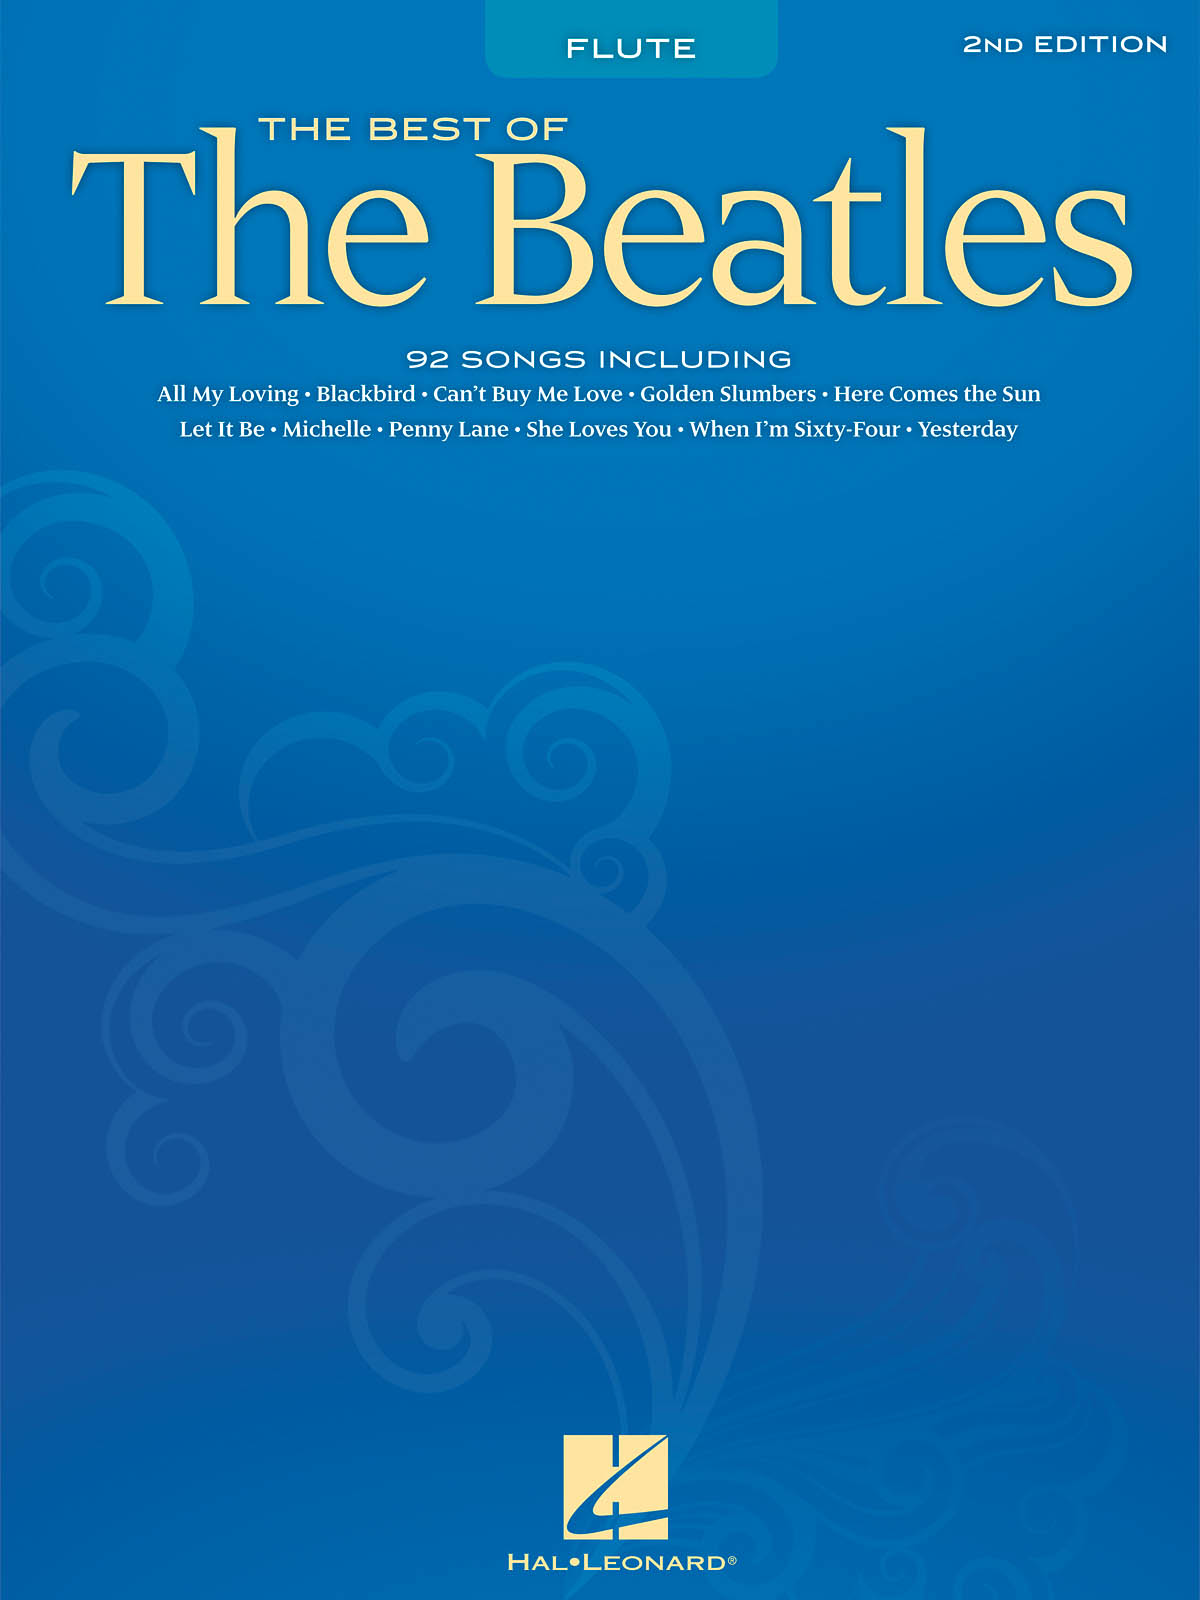 Best of Beatles 2nd Edition (Flute)